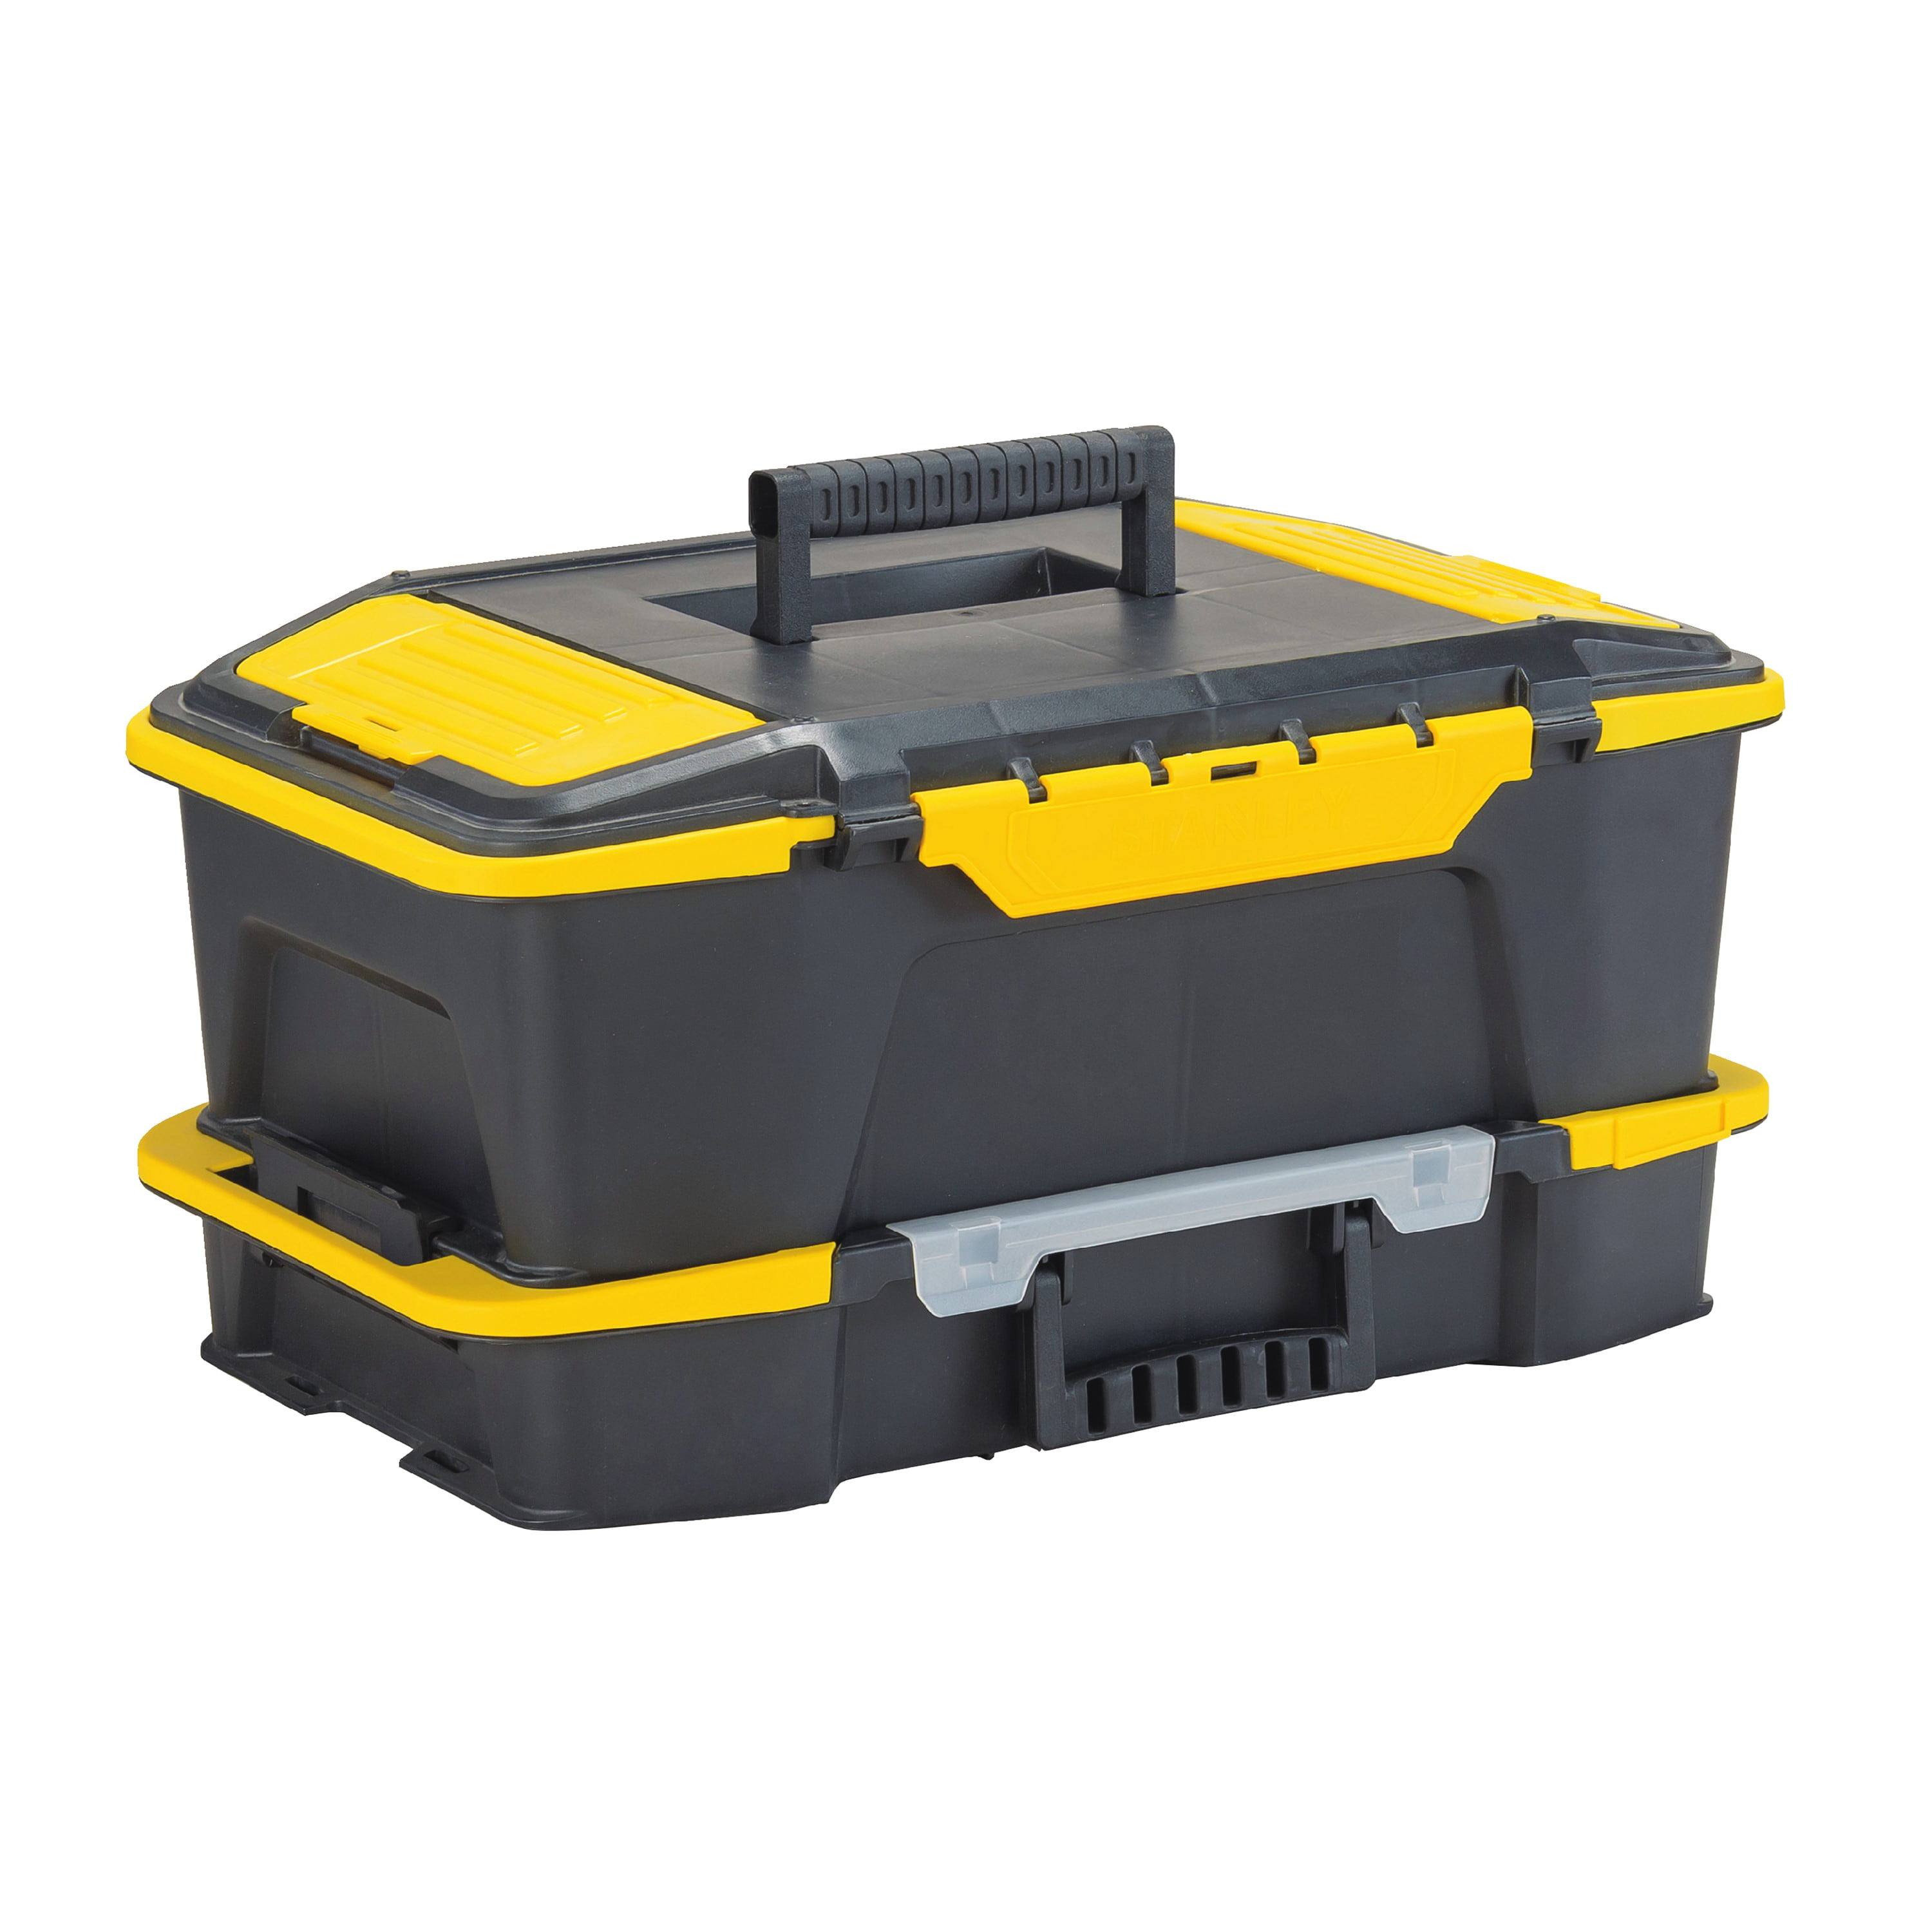 Stanley Essential Rolling Tool Box and Toll Organizer Model Stst18631